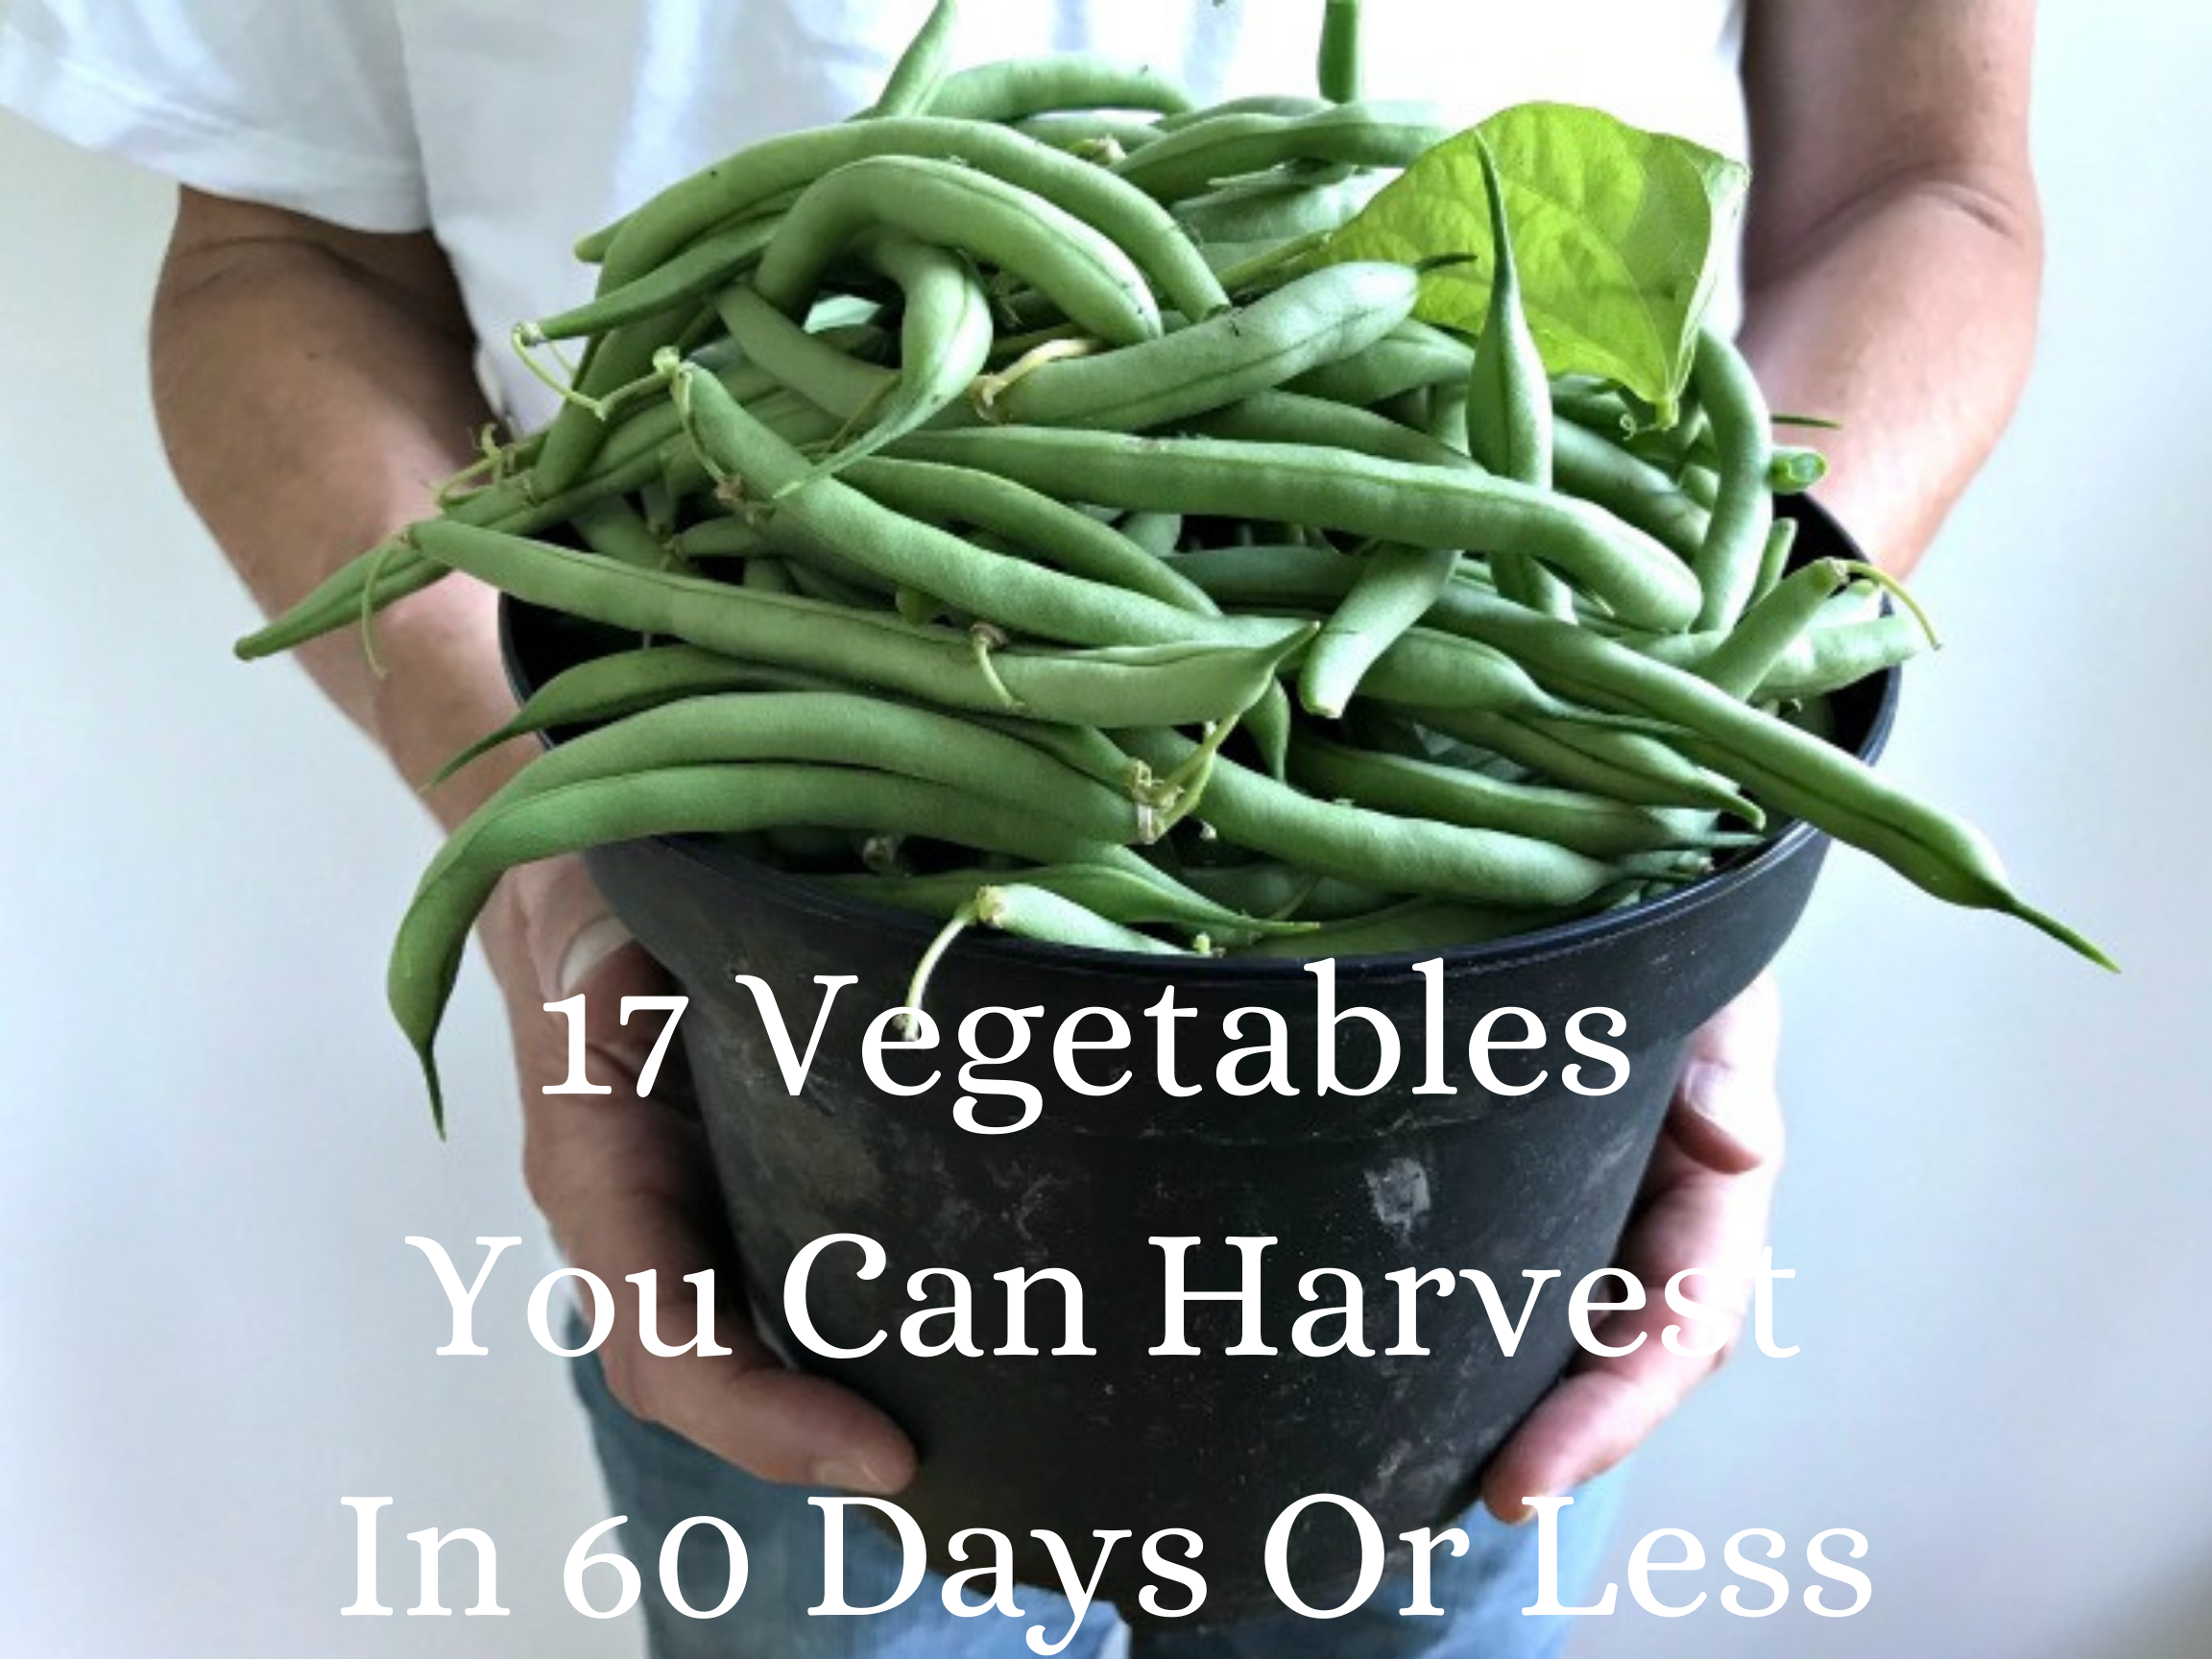 17 Vegetables You Can Harvest In 60 Days Or Less